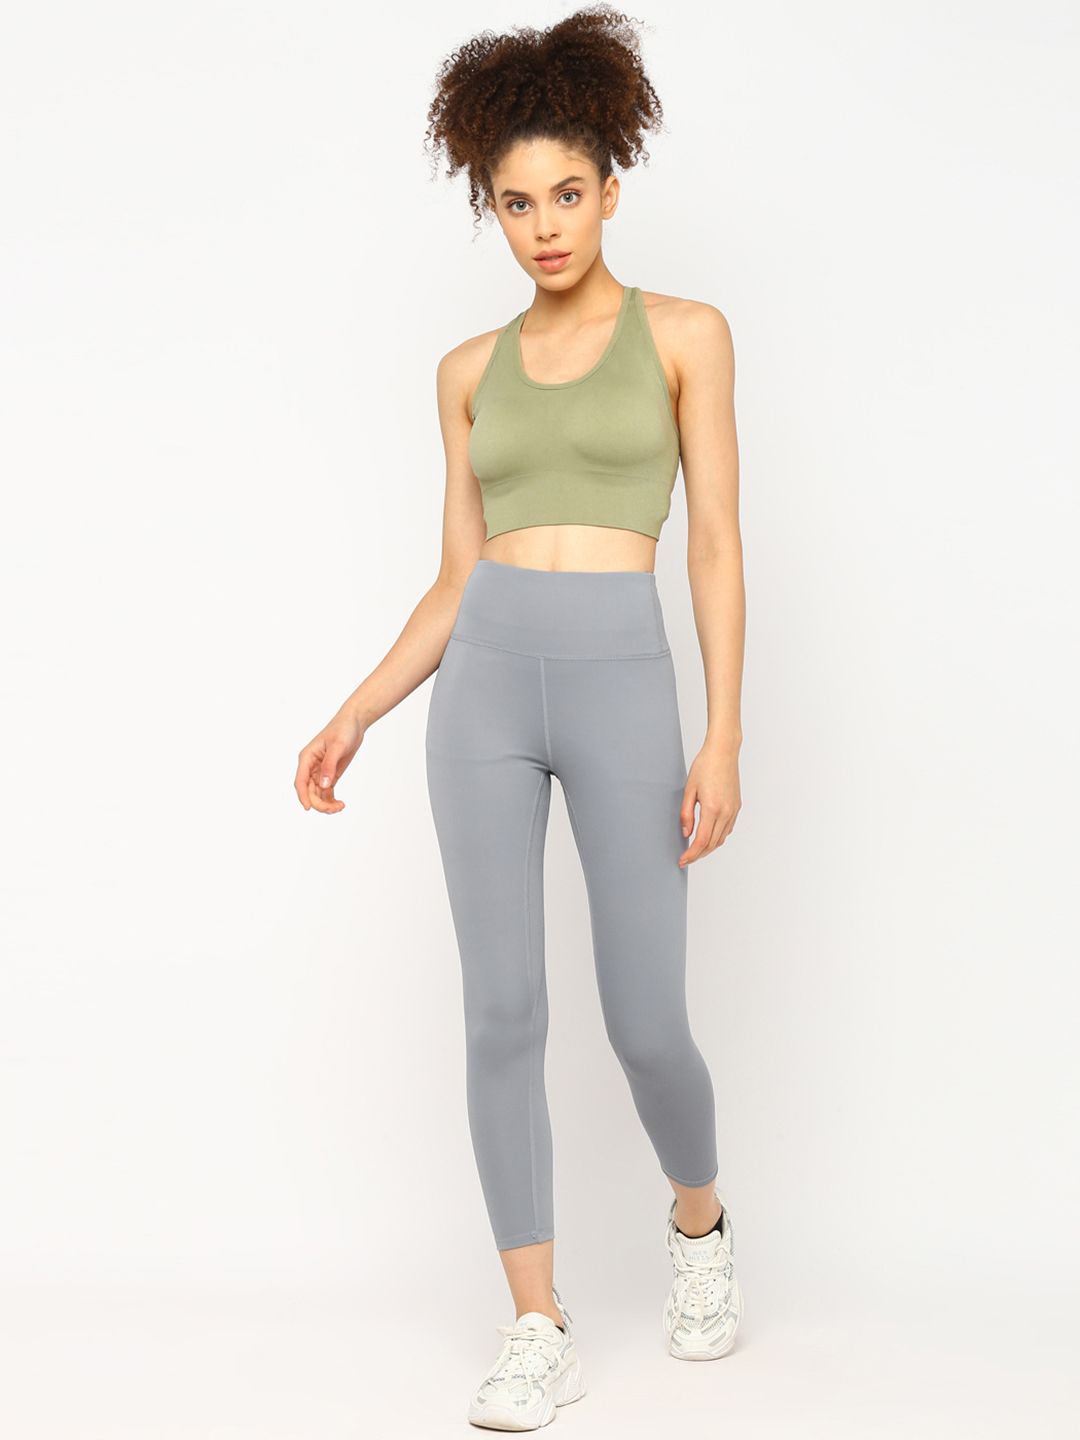 JerfSports Women Olive Green & Grey Solid Sports Bra & Tights Set Price in India